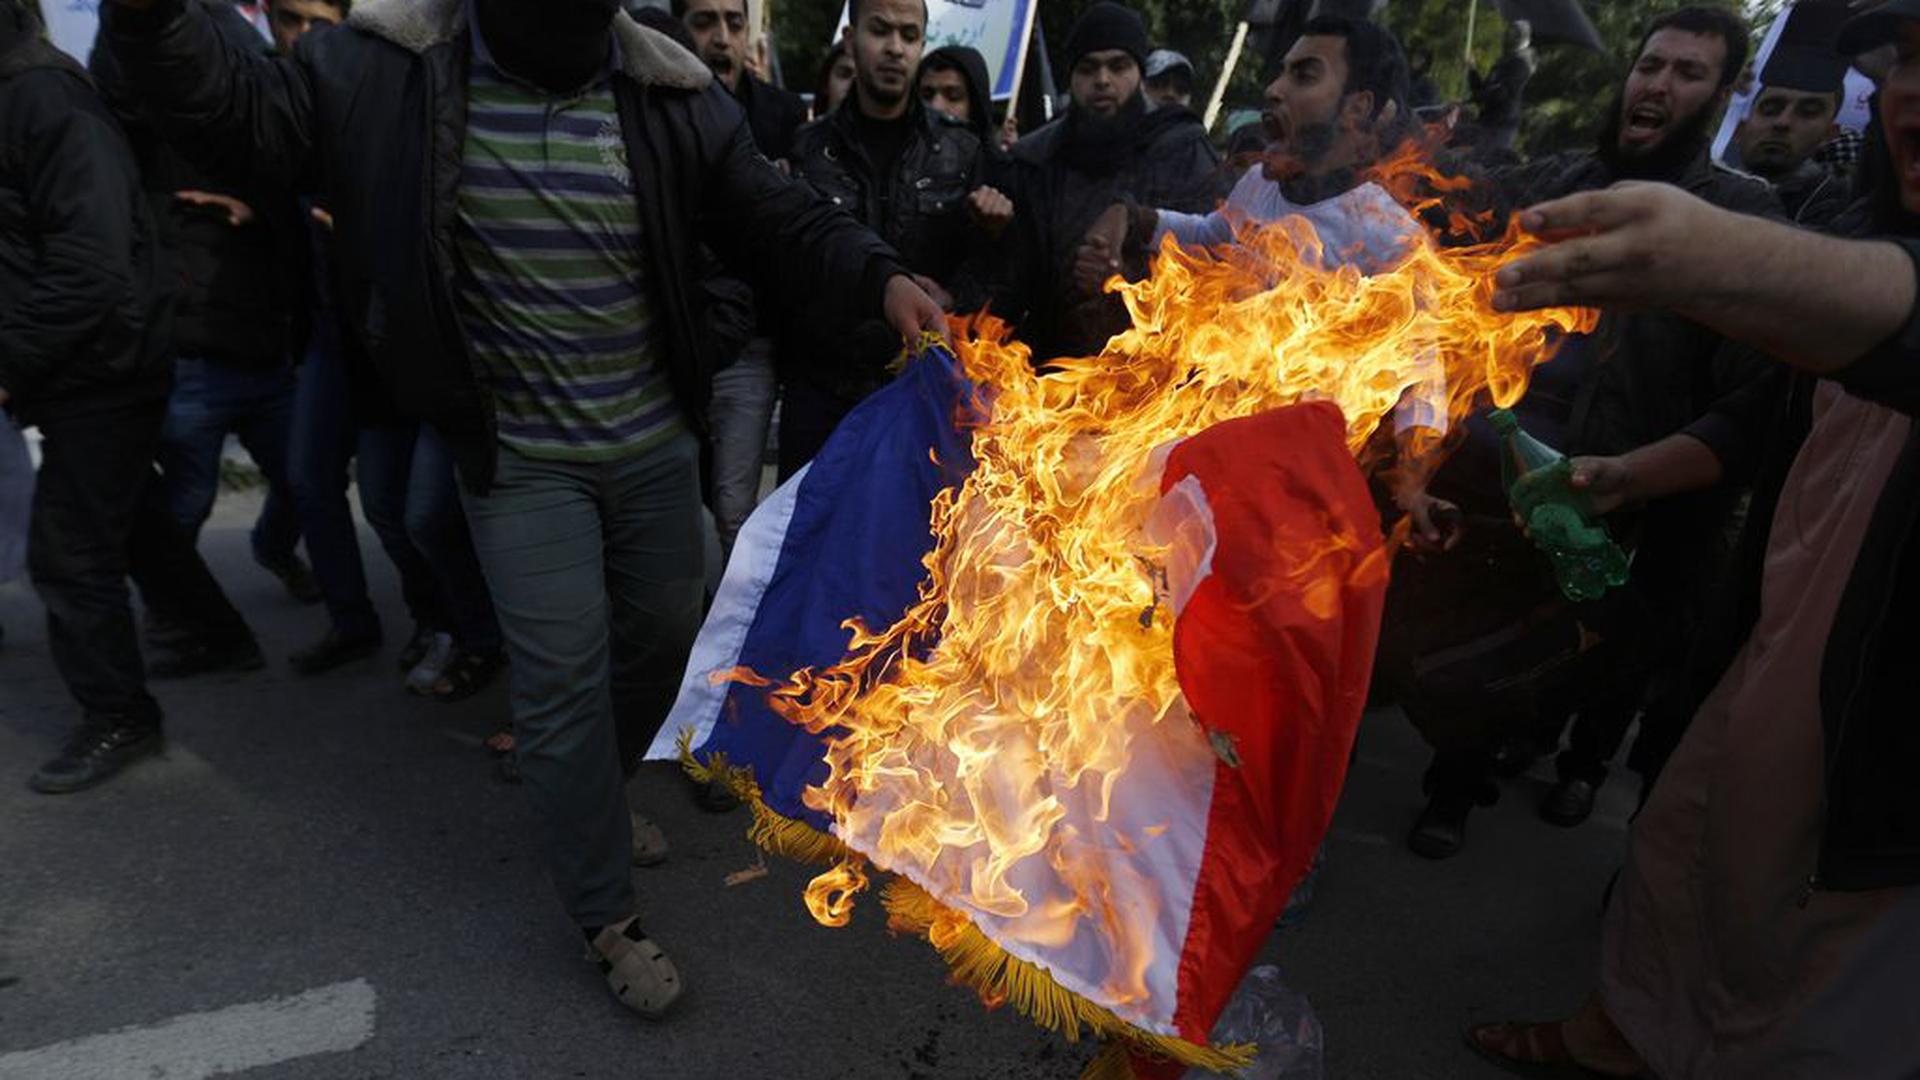 TOPSHOTS
A Palestinian Salafist burns a French national flag during a protest against the printing of satirical sketches of the Prophet Mohammed by French satirical weekly Charlie Hebdo on January 19, 2015 on their way to the French Cultural Centre in Gaza city. The walls of Gaza's French Cultural Center were painted on January 16 with graffitti in reaction to a cartoon published in the latest issue of Charlie Hebdo showing on its cover the prophet Mohammed holding a "Je Suis Charlie" (I am Charlie) sign under the headline "All is forgiven".  AFP PHOTO / MOHAMMED ABED